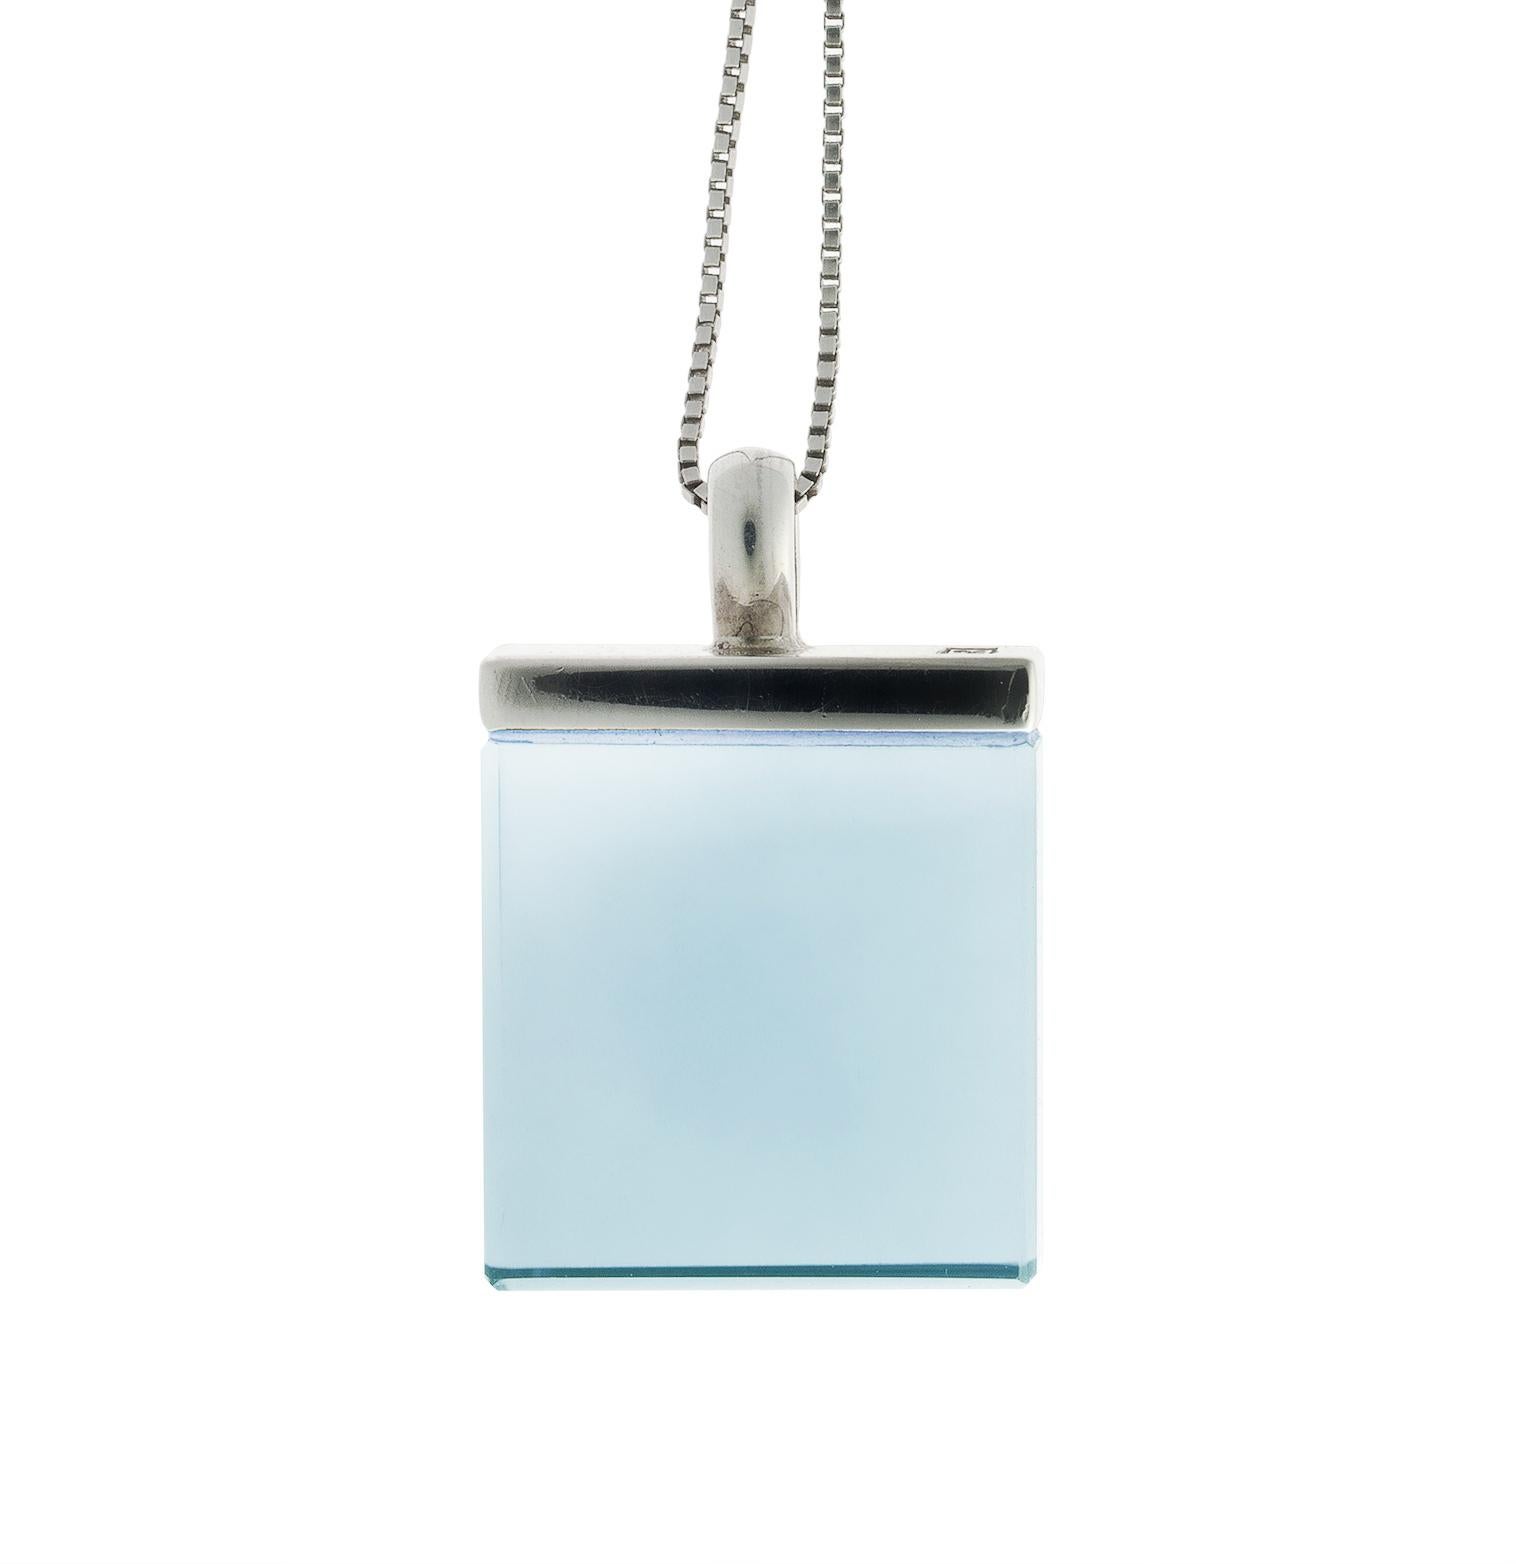 Here's a revised version of your text with improved grammar and flow:

This designer pendant necklace in Art Deco style features a 15x15x8 mm blue quartz and is made of 18-karat white gold. It belongs to the Ink collection, which has been featured